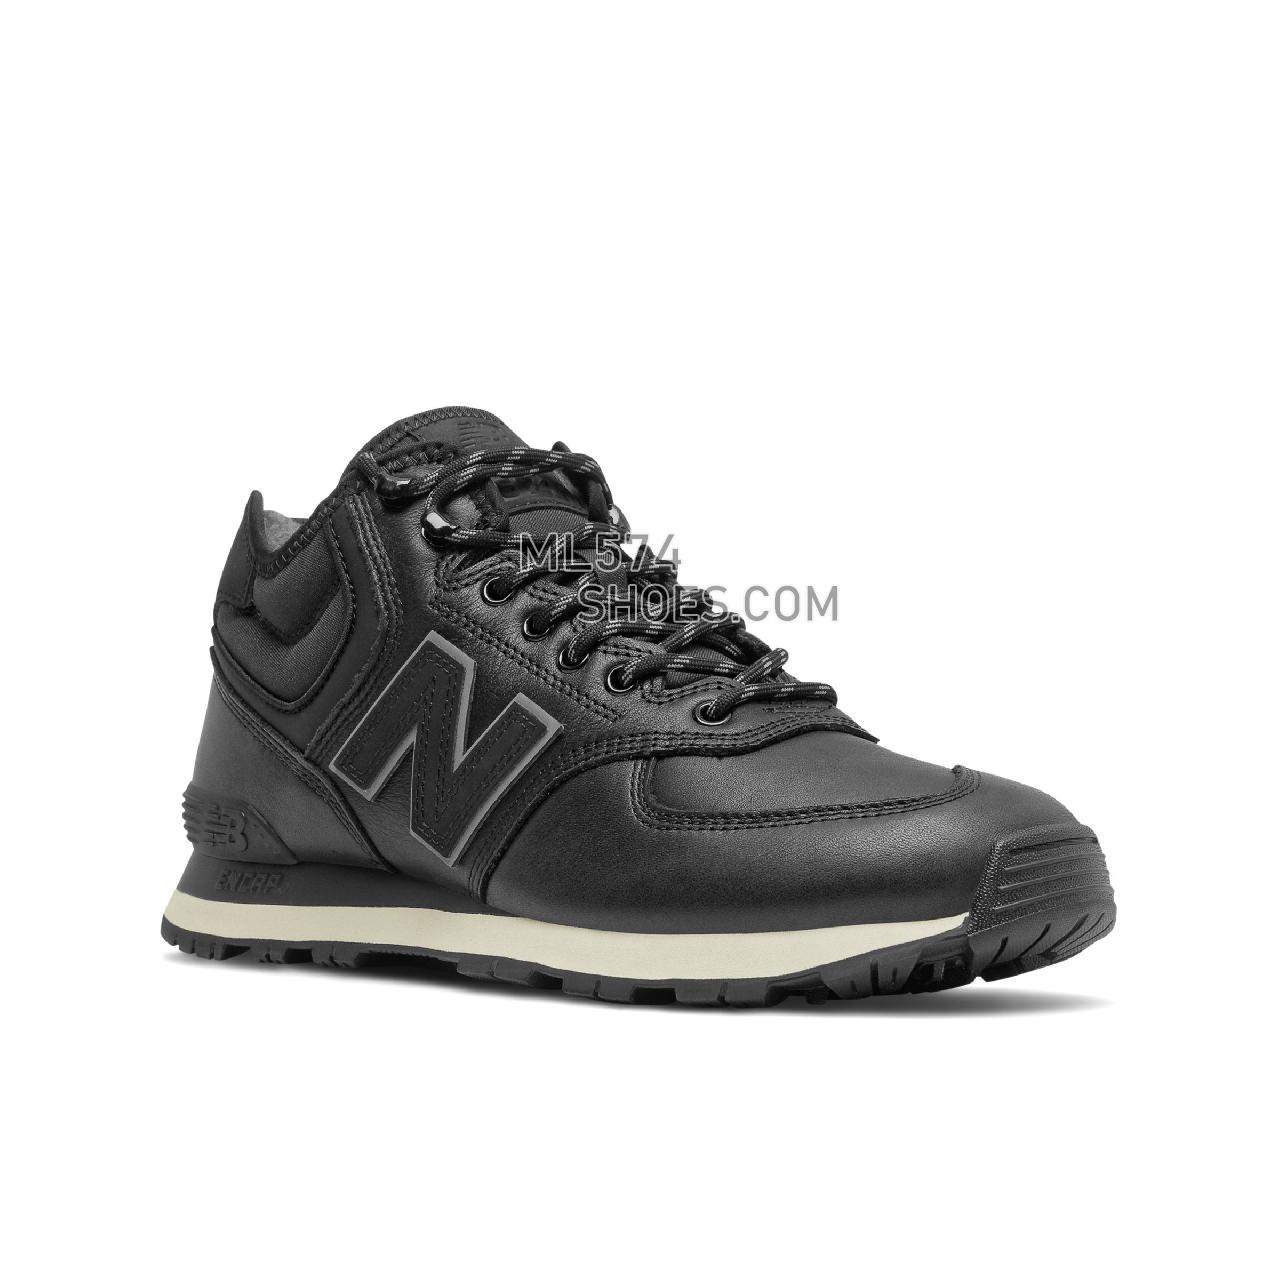 New Balance MH574V1 - Men's Classic Sneakers - Black with Moonbeam - MH574GX1